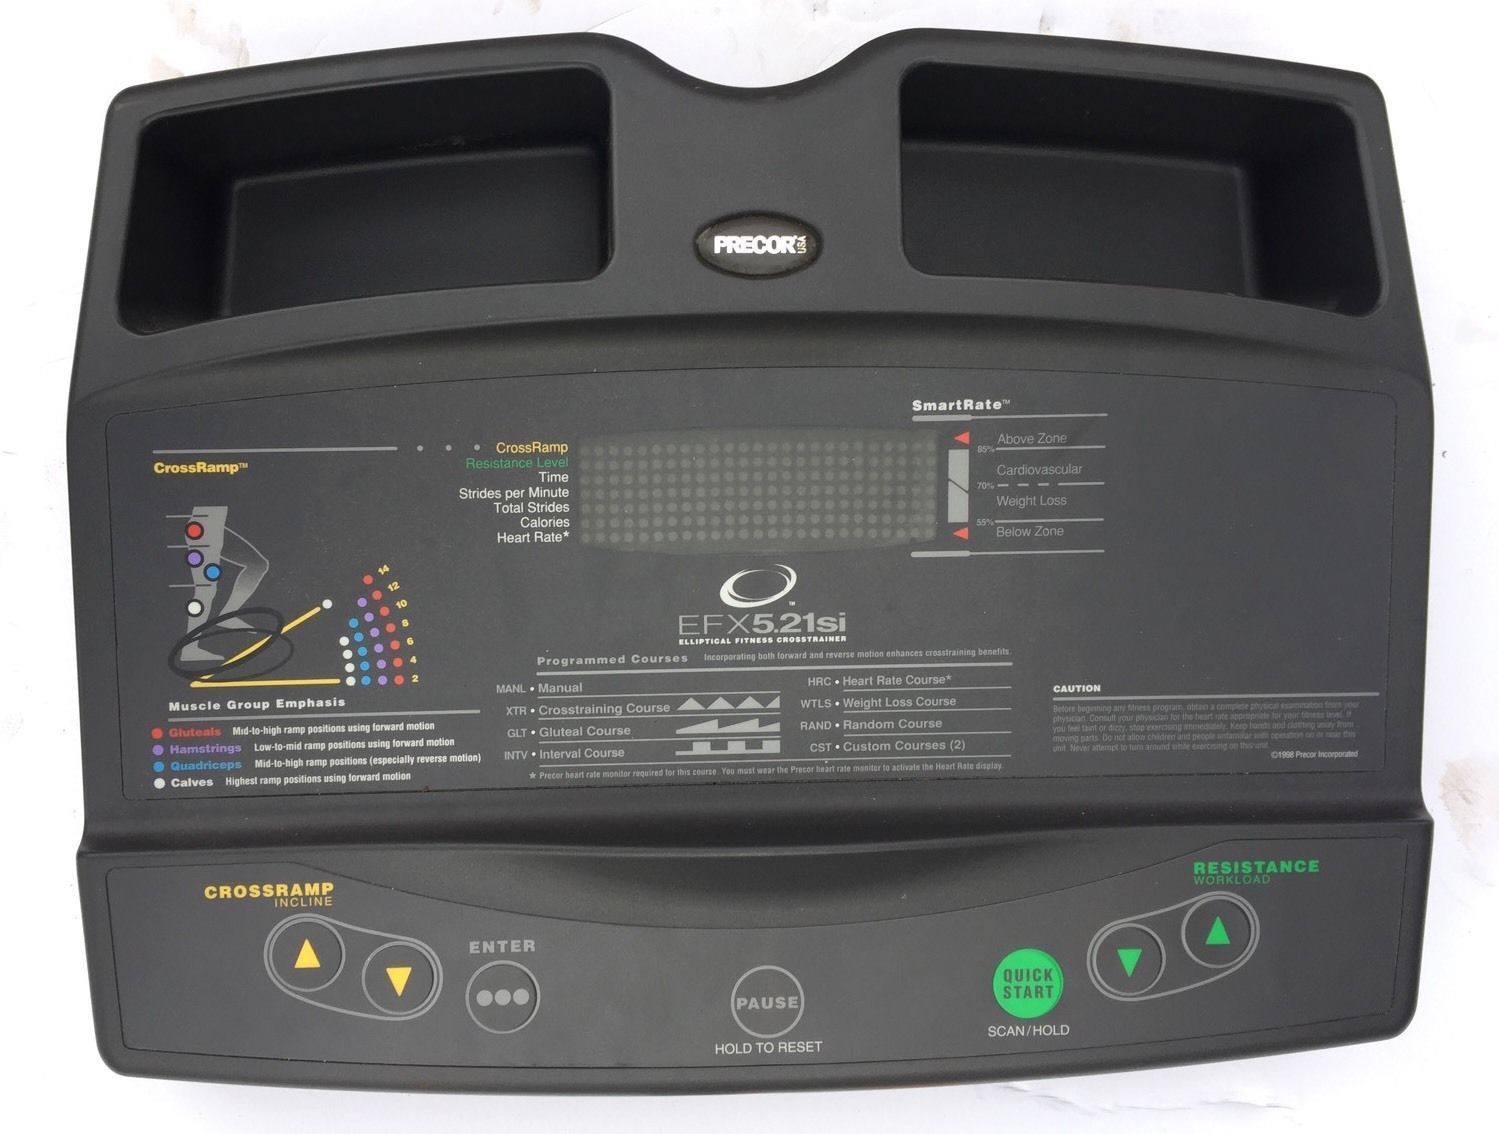 Precor efx 5.21si Elliptical PCA Display Console Touch Pad + Board 37990-101 or 38672-104 (Used)